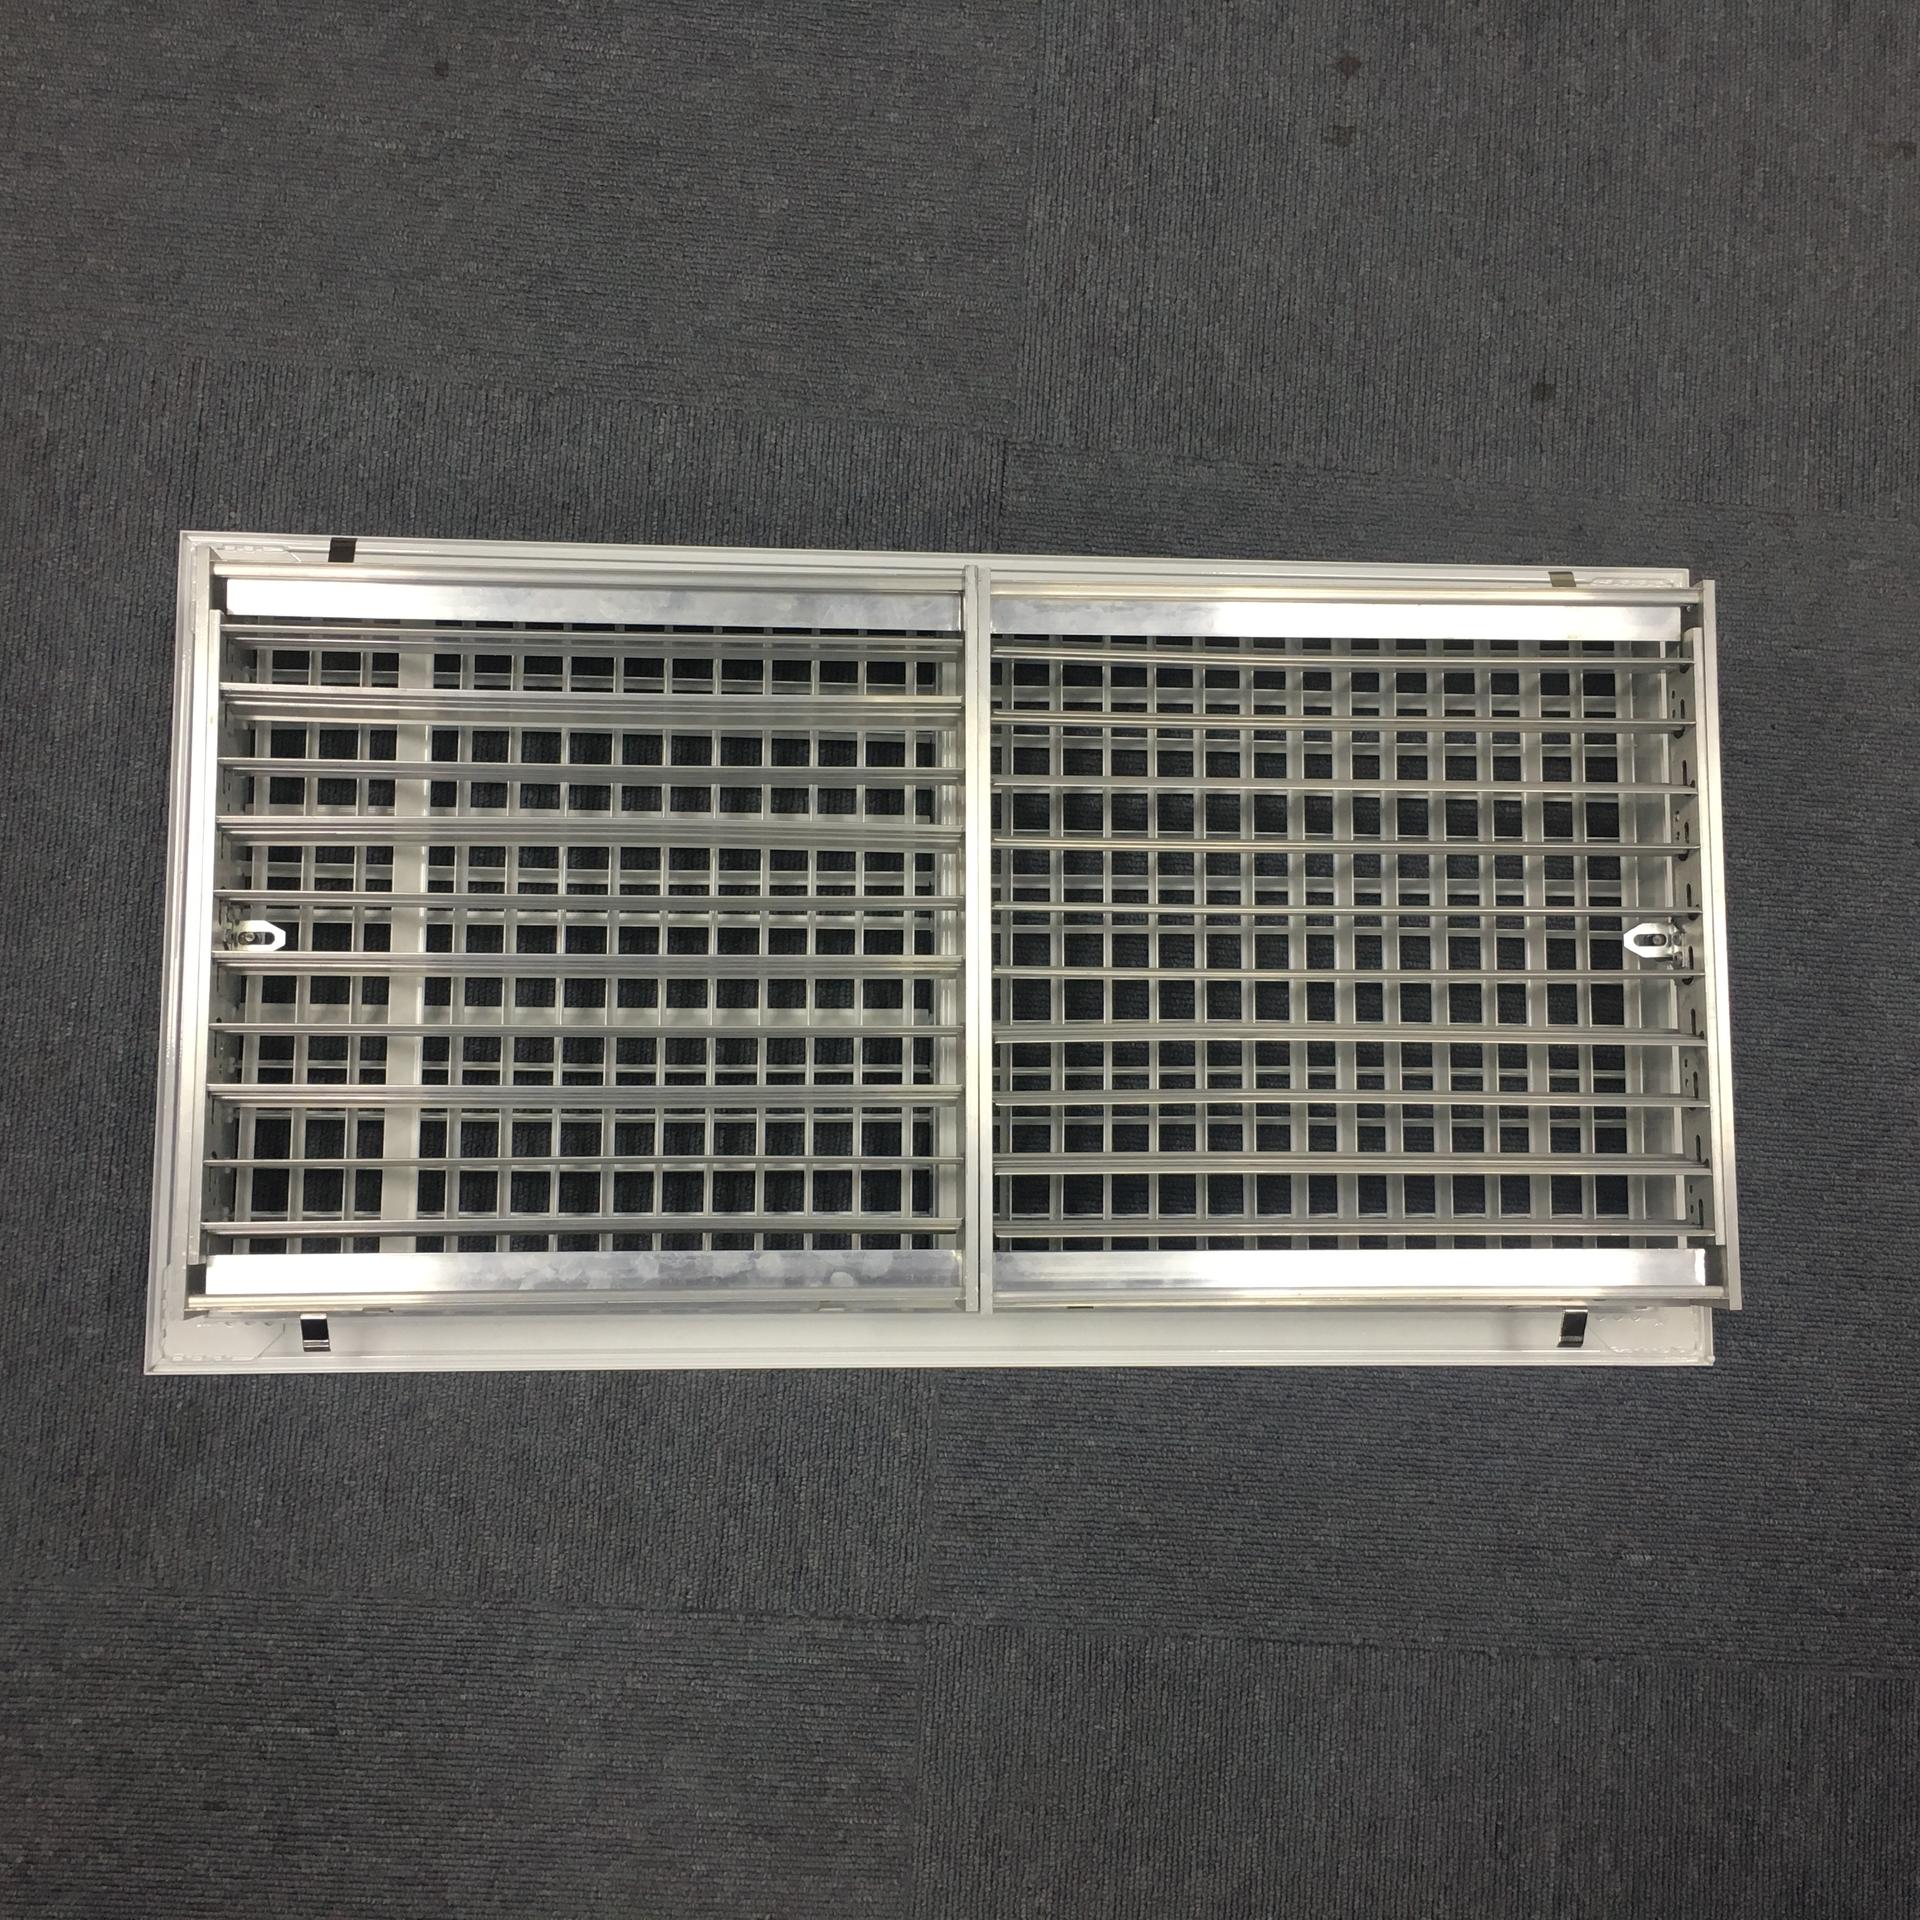 Air Vent Supply Aluminum Diffuser Oppose Blade Damper Ceiling Double Deflection Air Register Ventilation Air Grille for HVAC